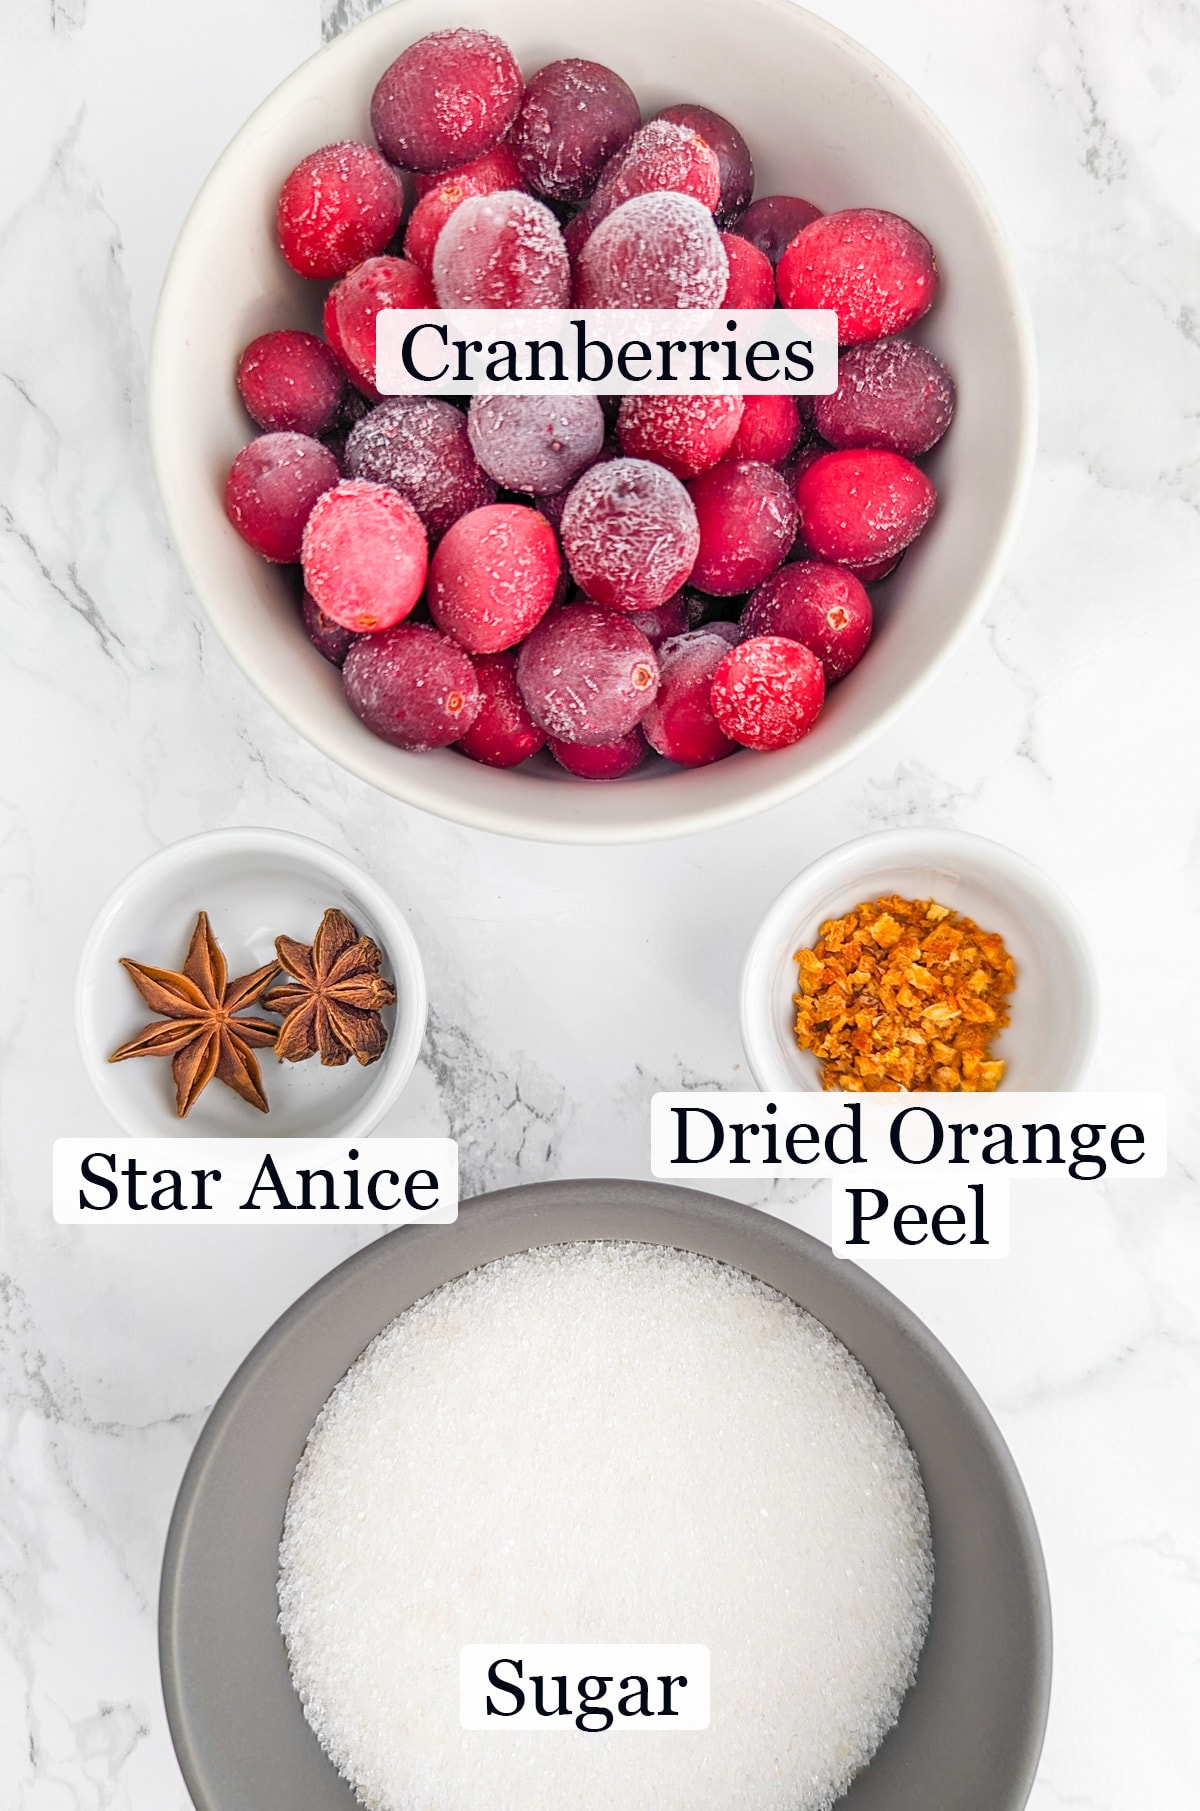 Frozen cranberries, dried orange peel, sugar and star anice on a white marble surface.